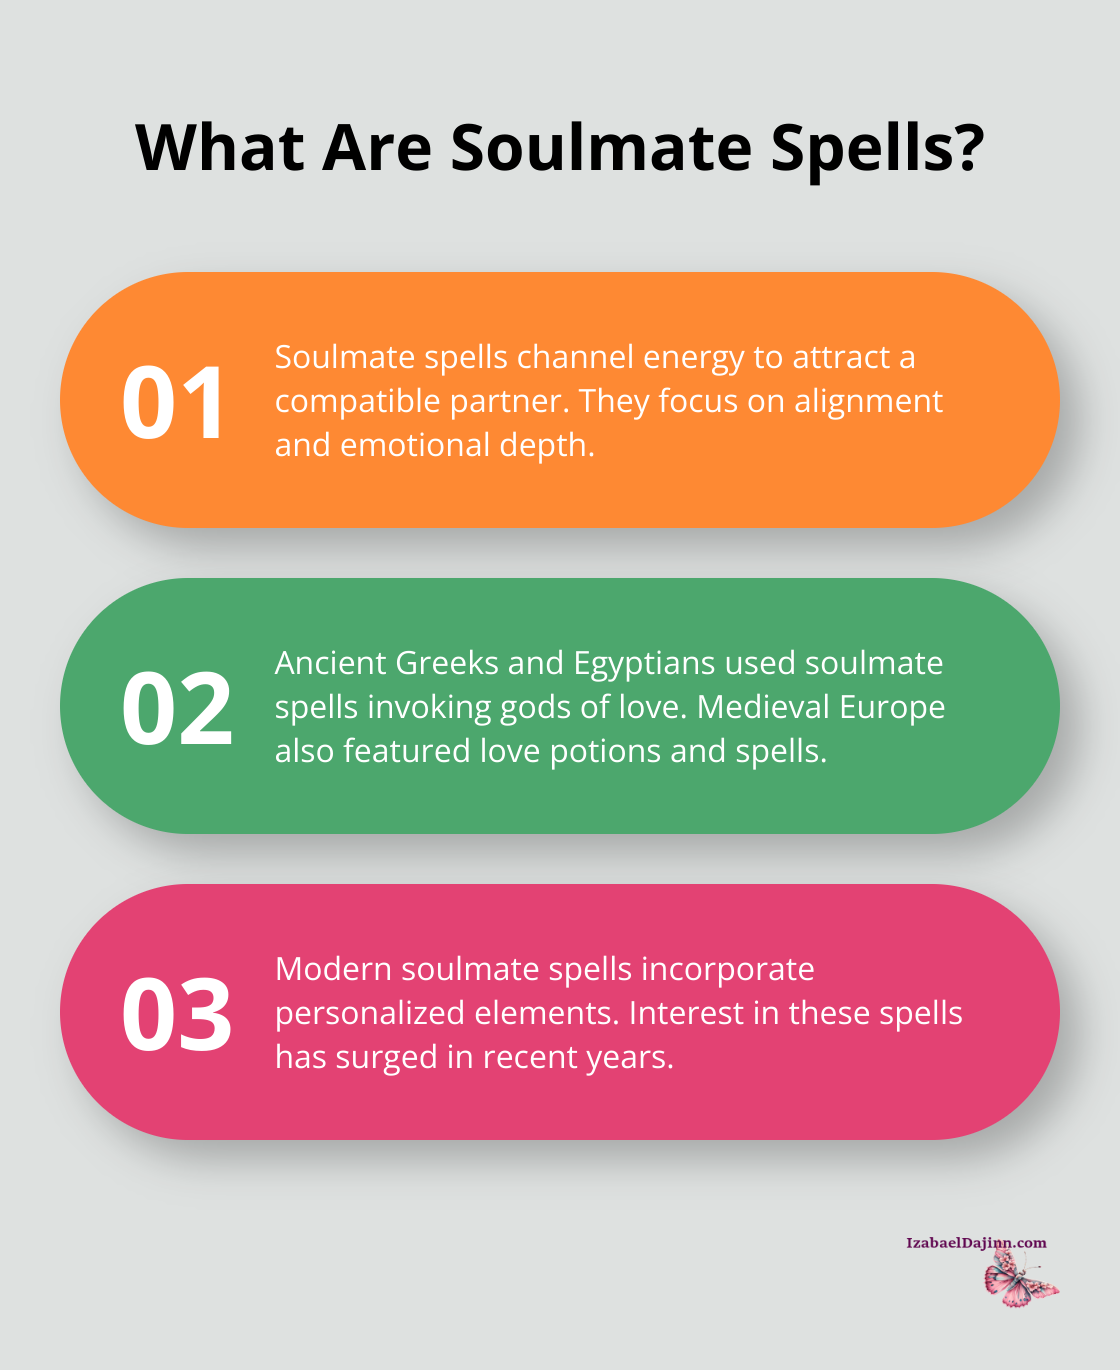 Fact - What Are Soulmate Spells?